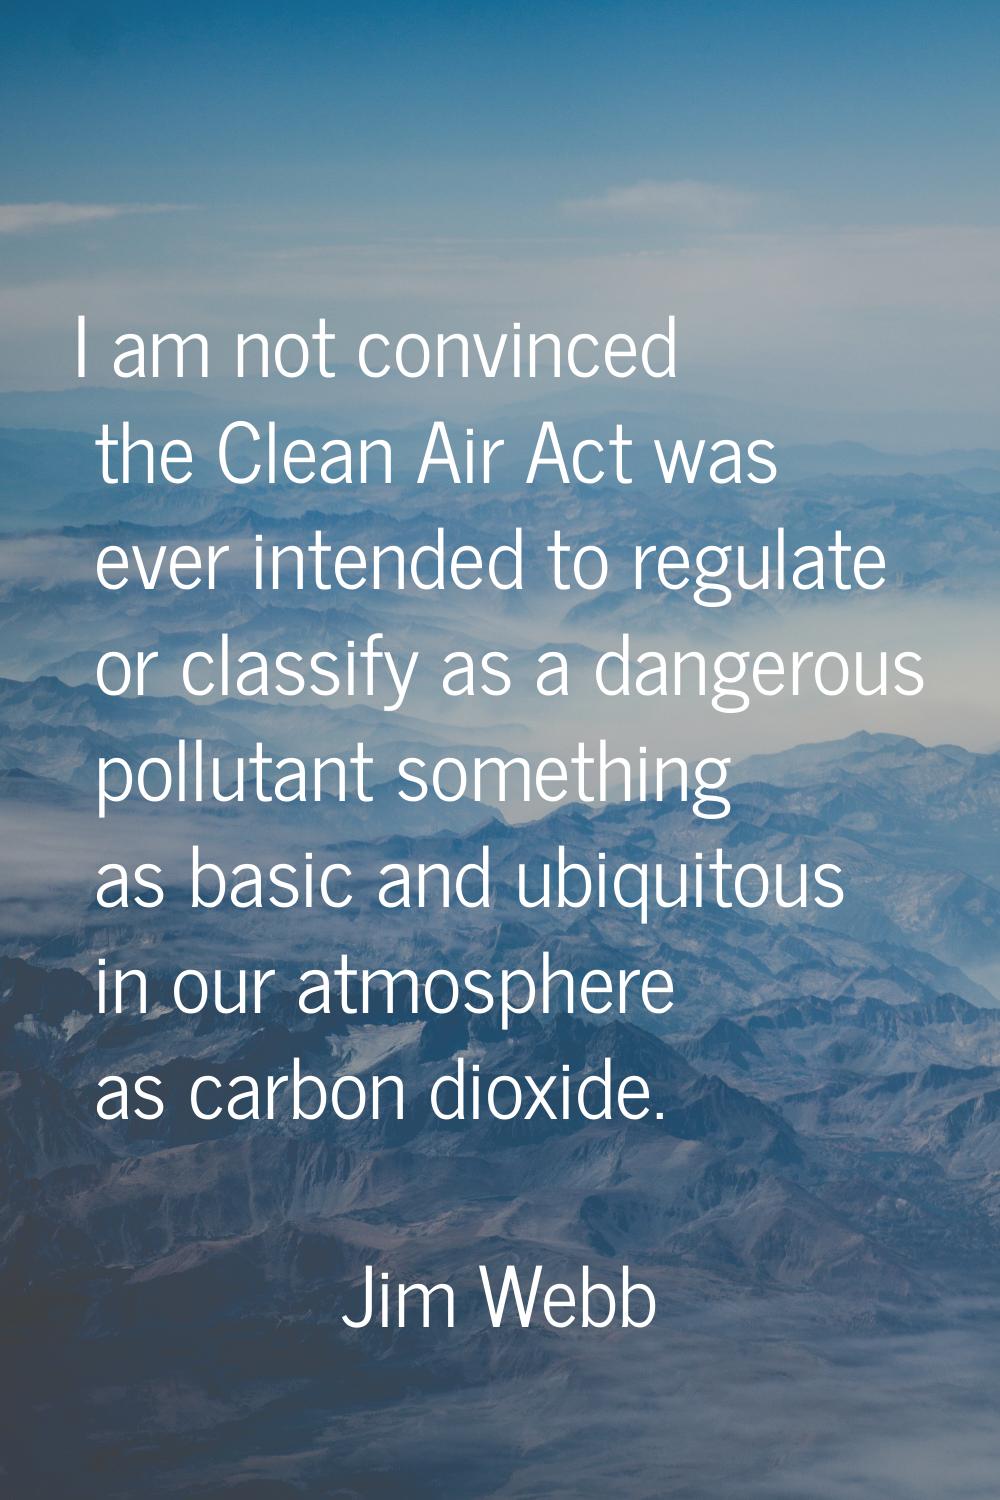 I am not convinced the Clean Air Act was ever intended to regulate or classify as a dangerous pollu